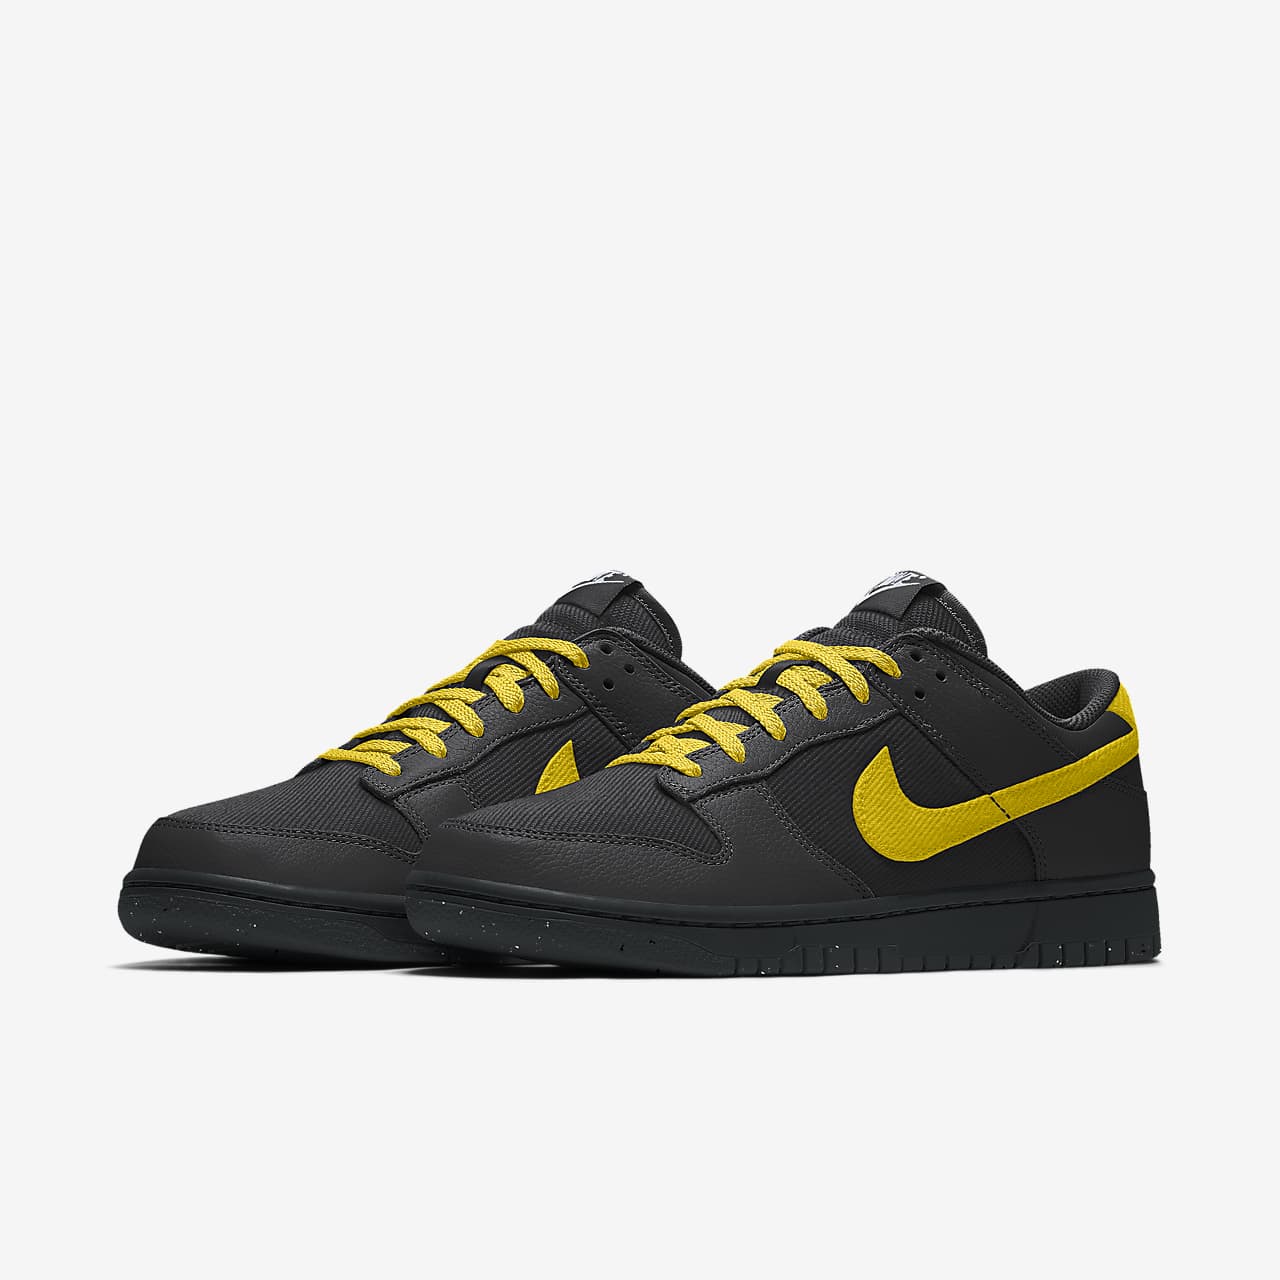 https://static.nike.com/a/images/t_PDP_1280_v1/f_auto,q_auto:eco/759beb94-d1e0-4e8e-9dae-7311822a27b9/custom-nike-dunk-low-by-you-shoes.png